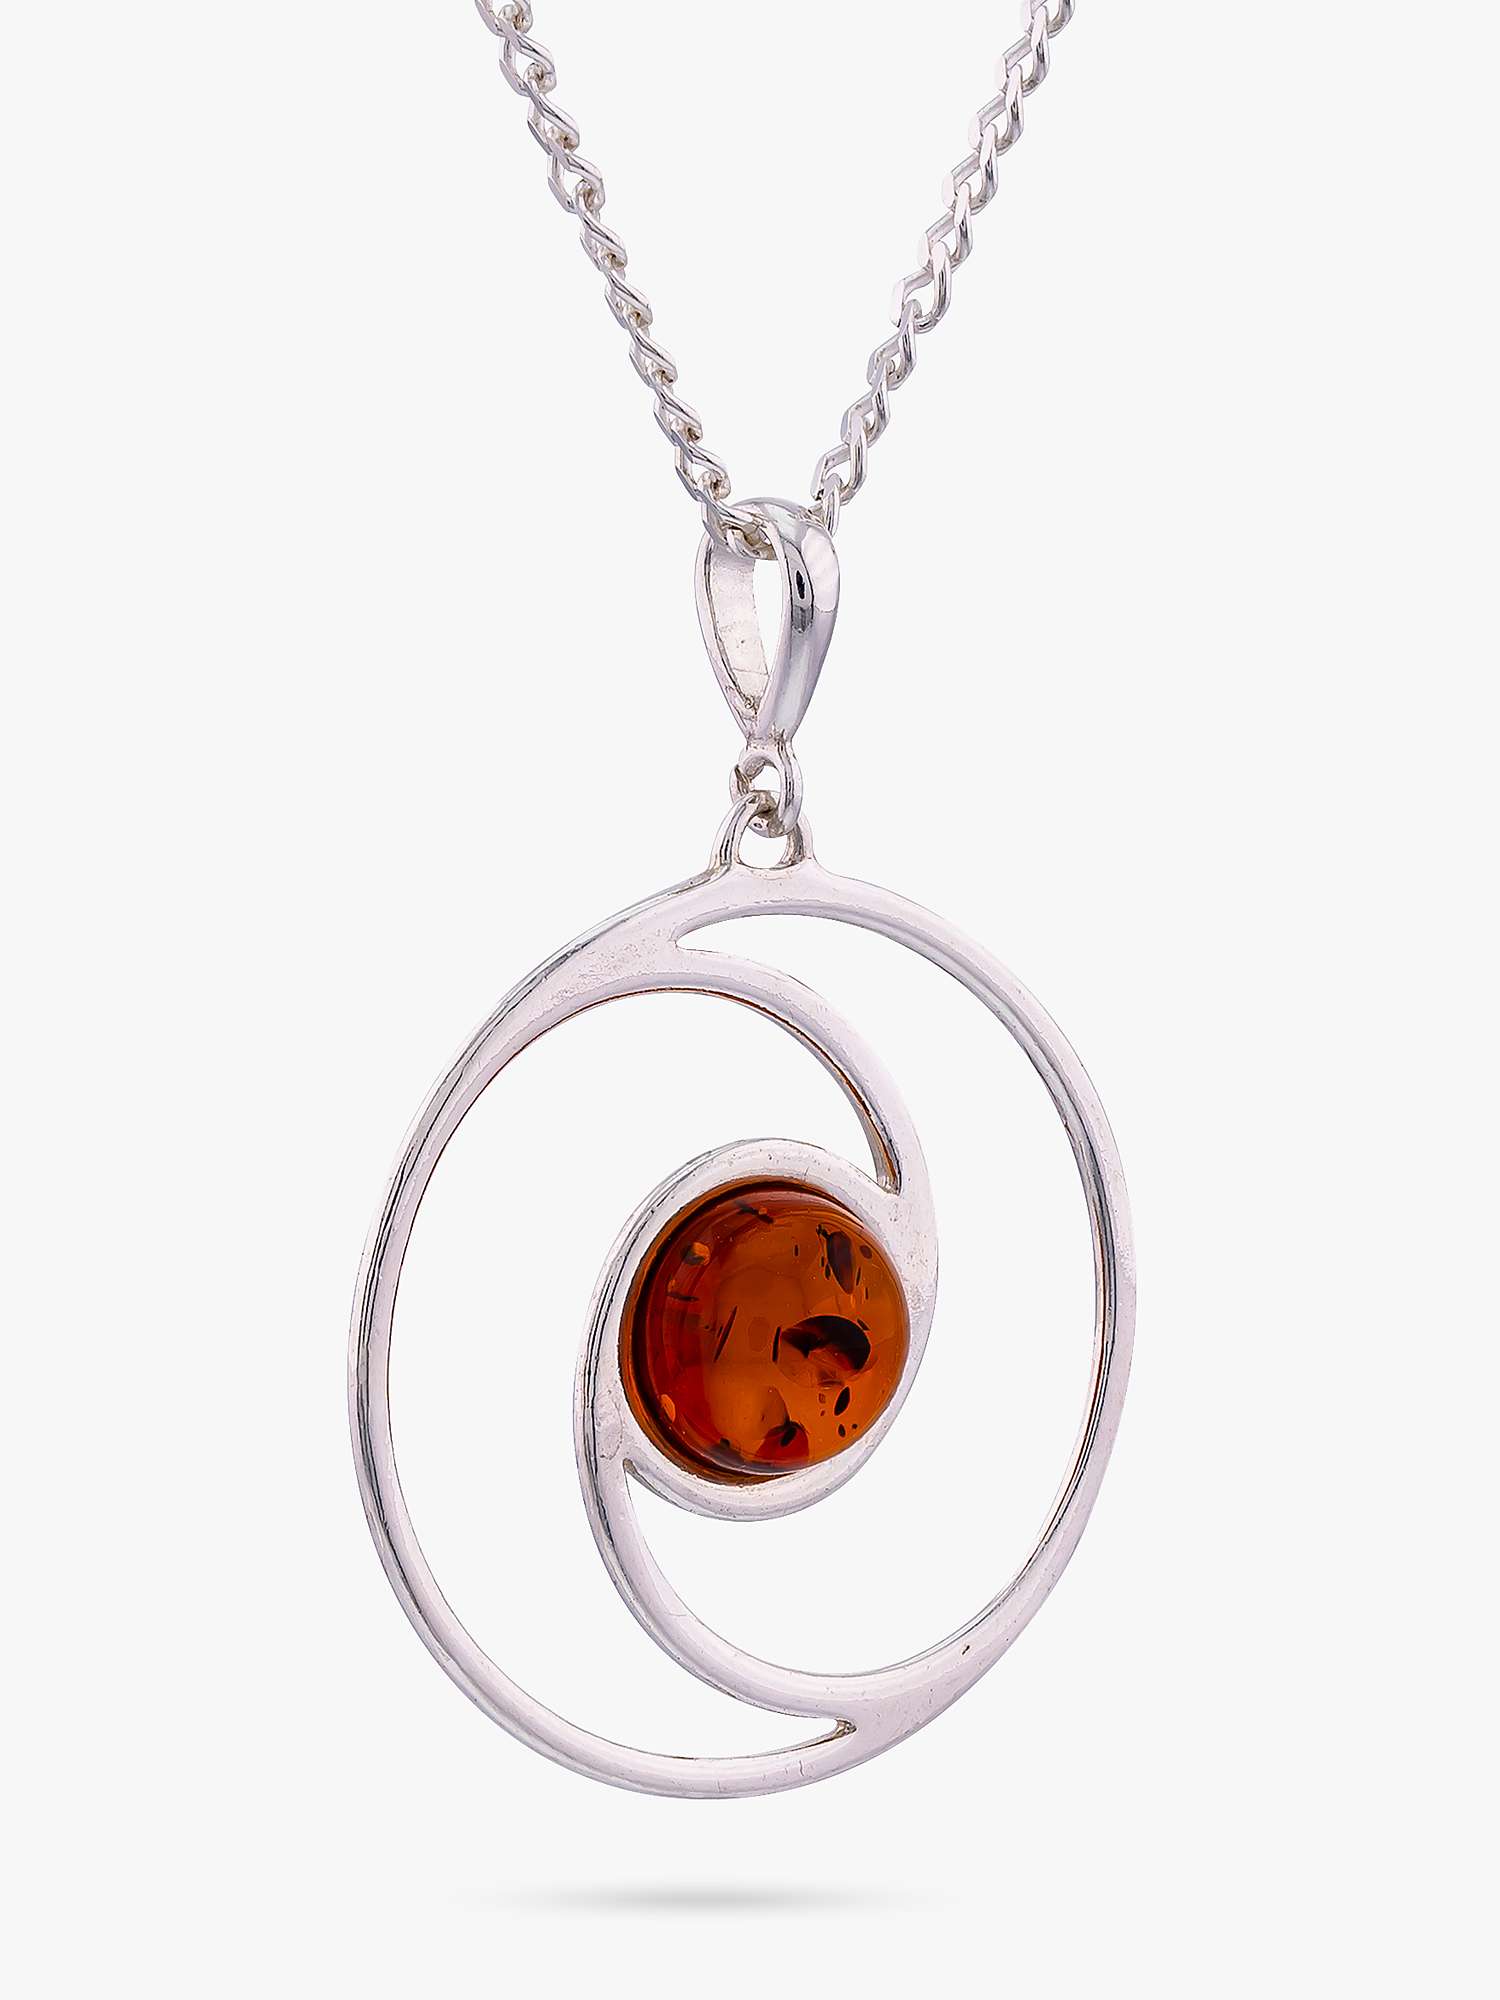 Buy Be-Jewelled Baltic Amber Circle Pendant Necklace, Silver/Cognac Online at johnlewis.com